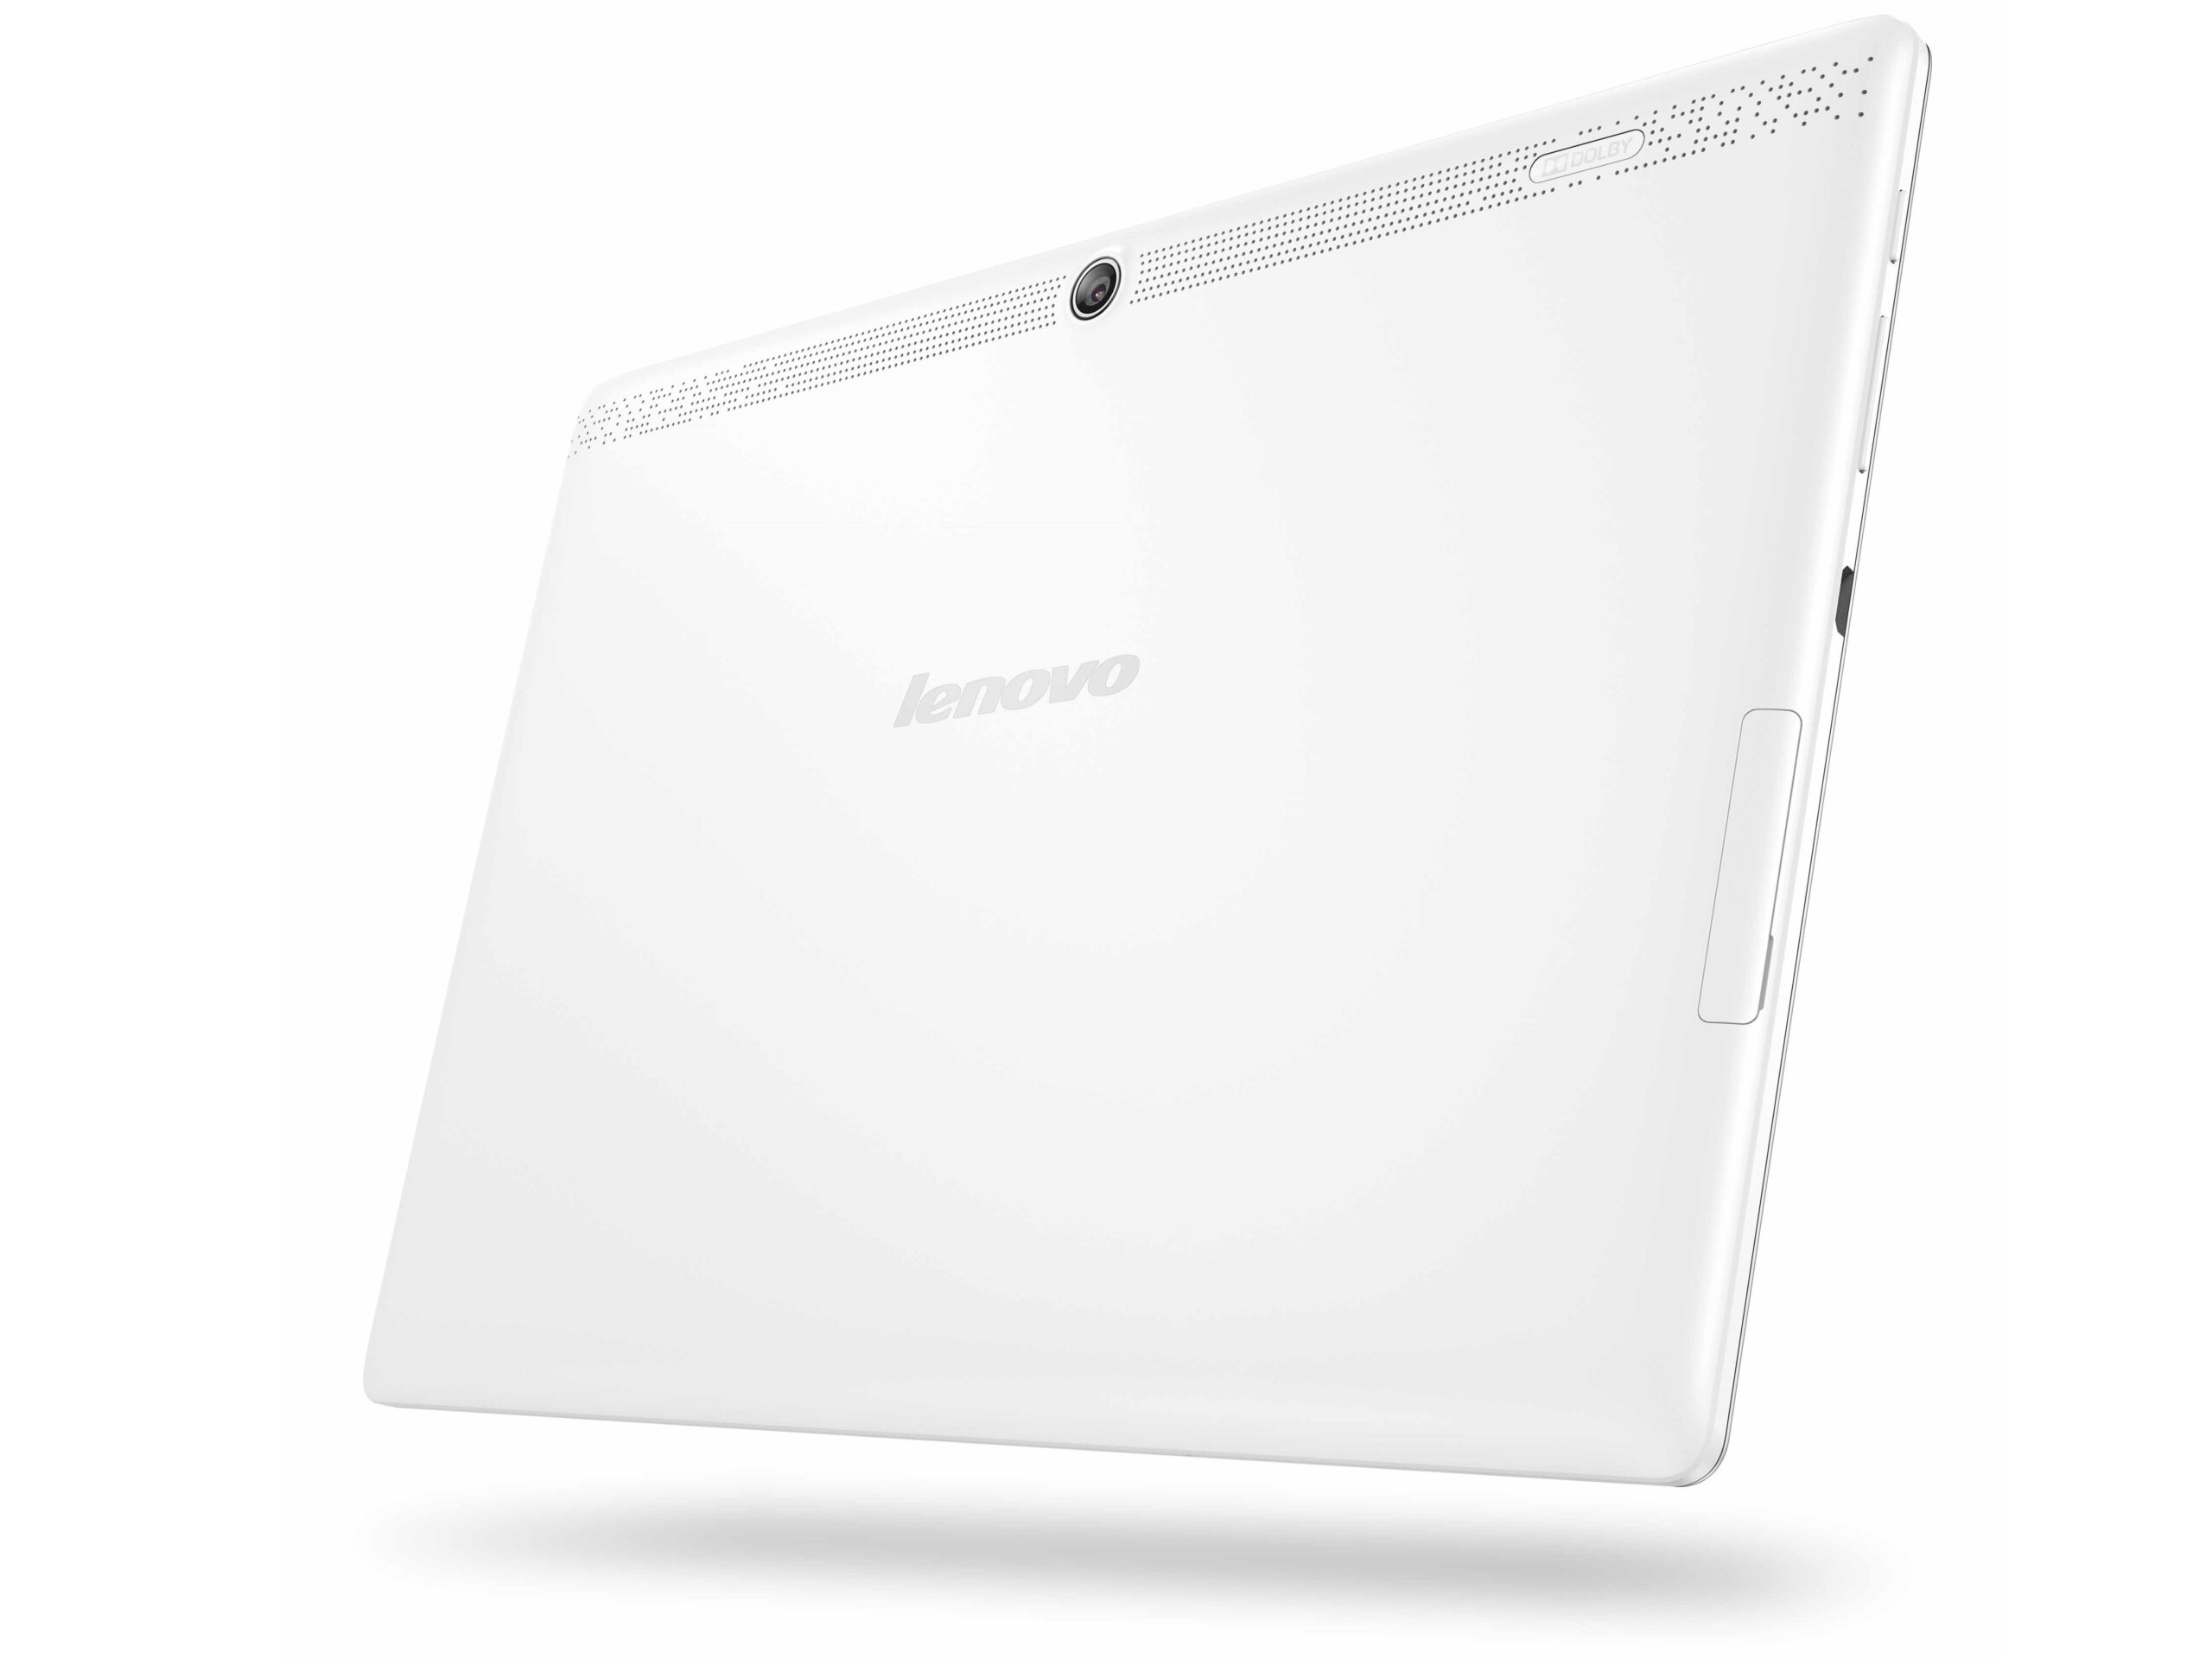 Lenovo TAB 2 A10 images and specs 4 scaled